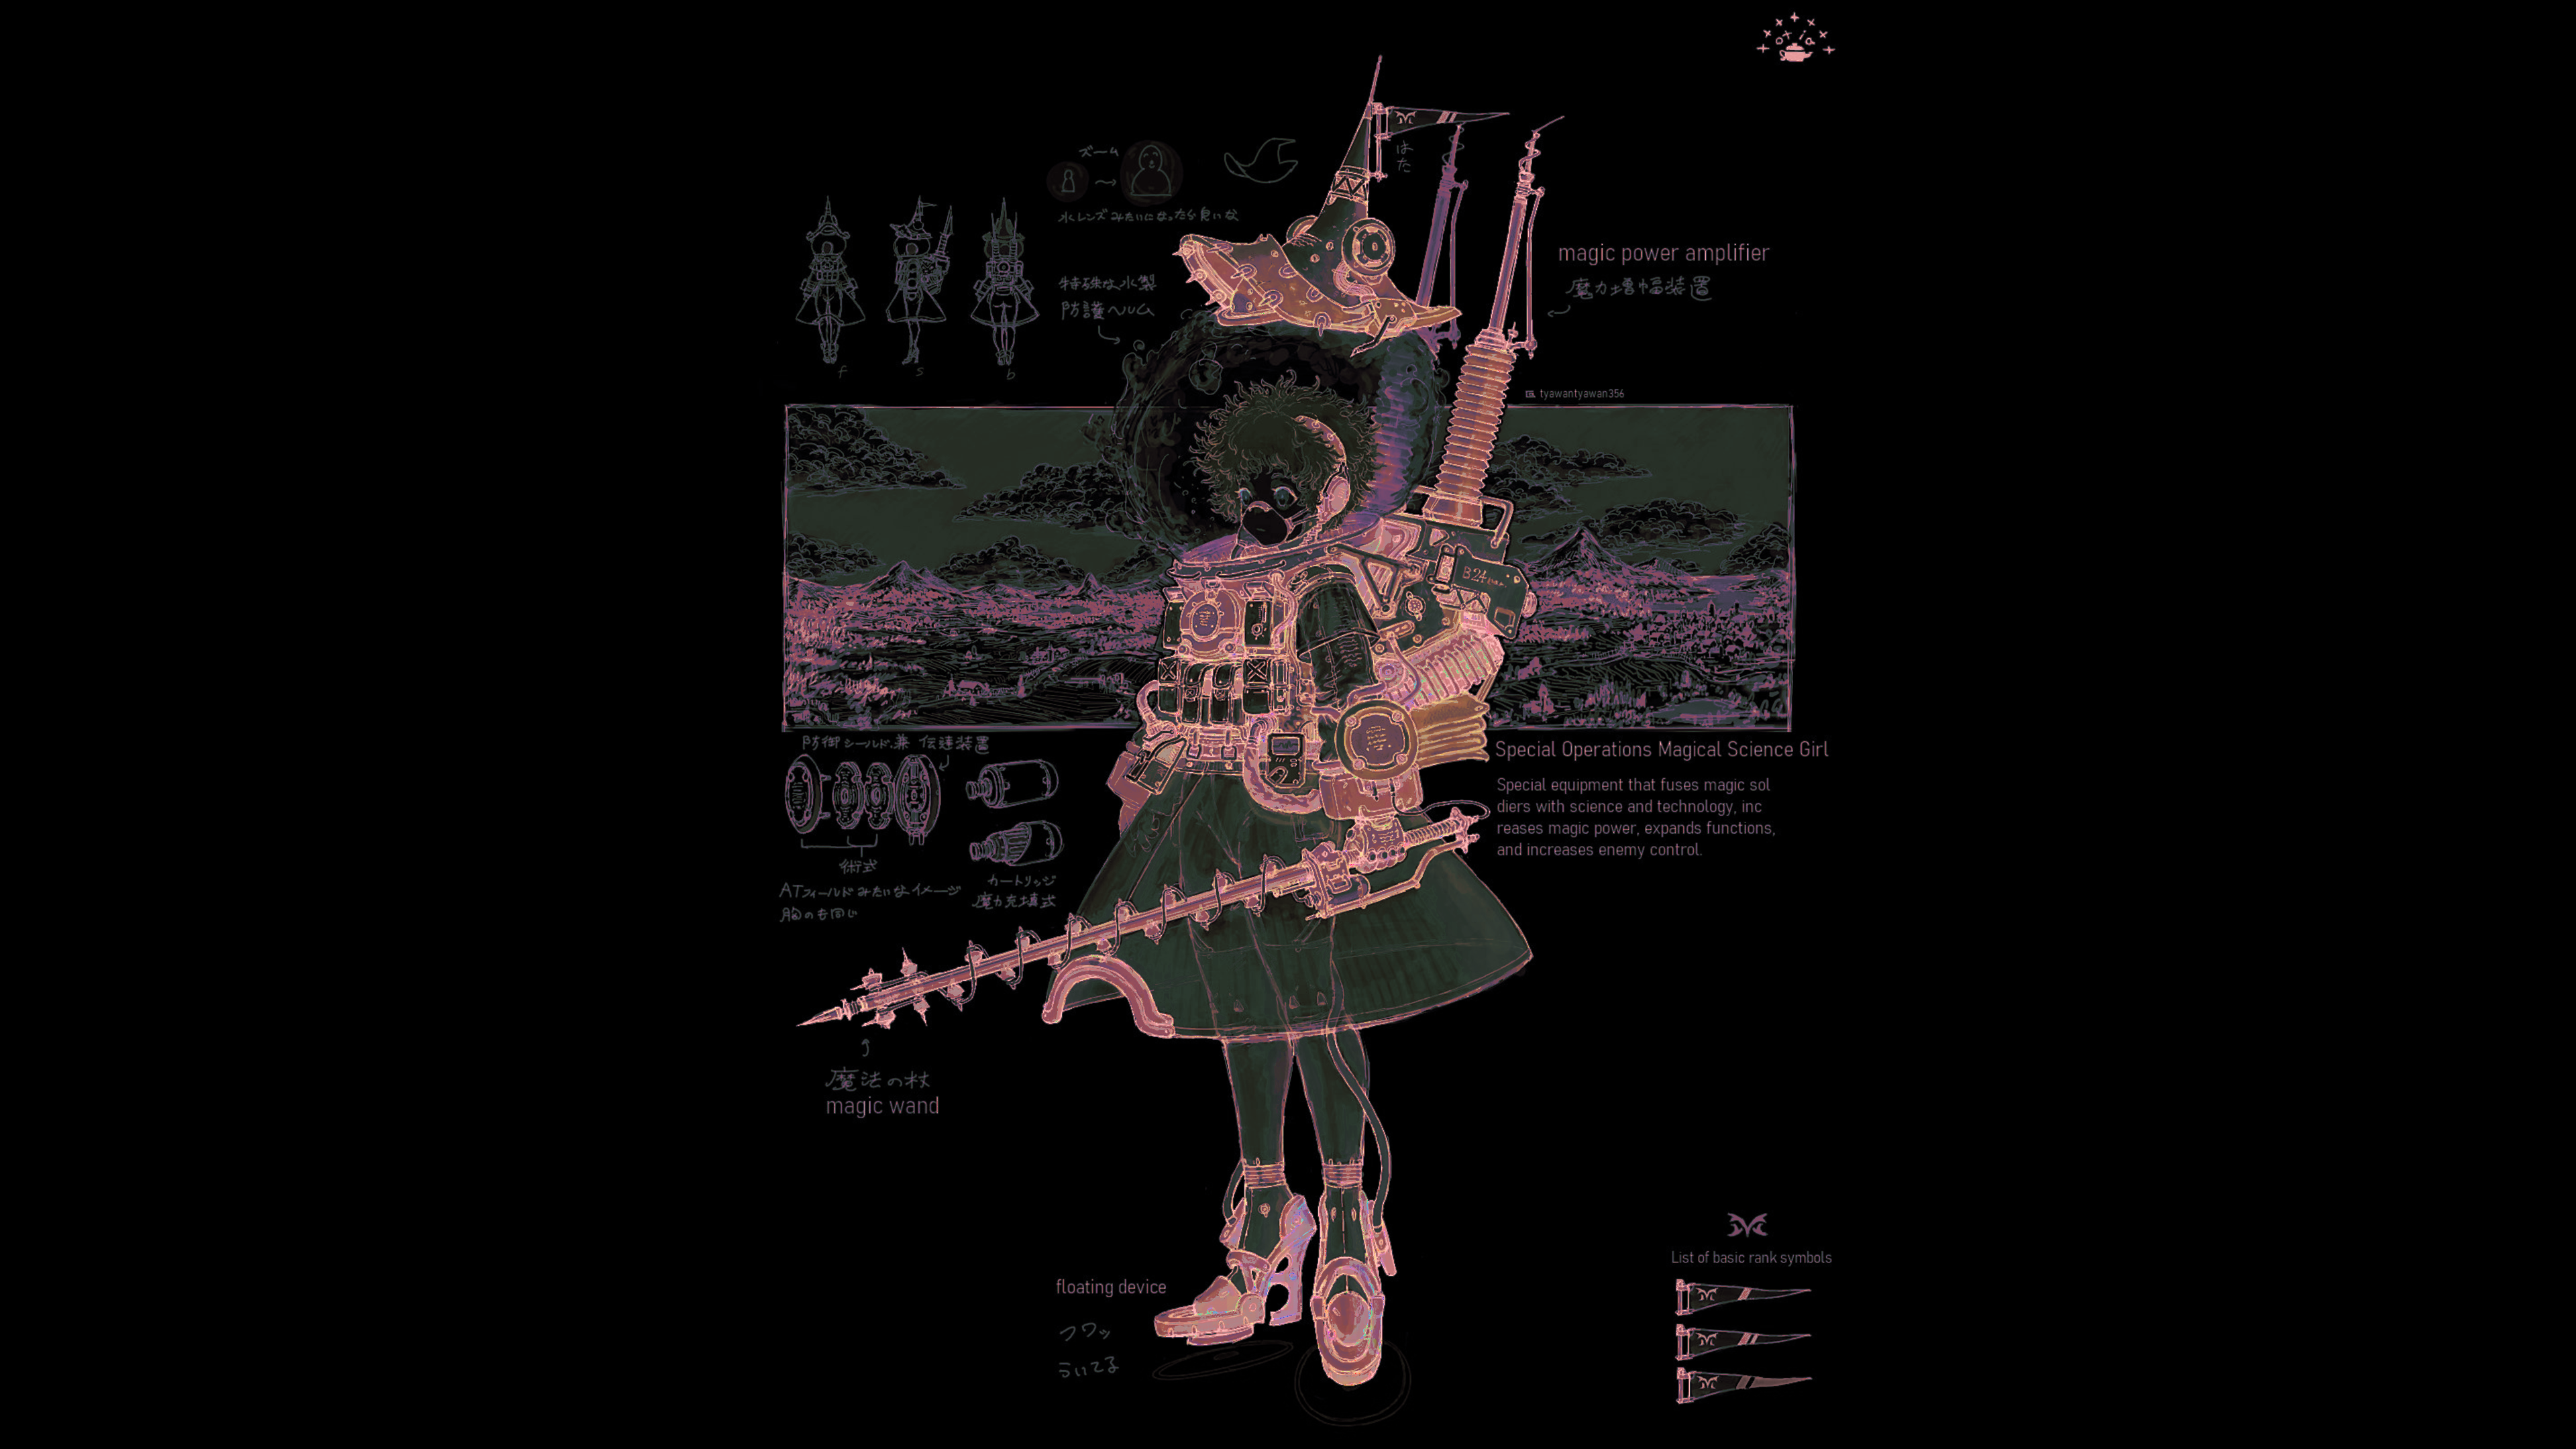 Anime 3840x2160 magical girls science military industrial curly hair weapon heavy equipment army map schematic infographics detailed ropes shoes skirt lance glass engine girl in armor water steampunk steampunk girl punk diagrams dark dark background Brutalism mountains witch original characters